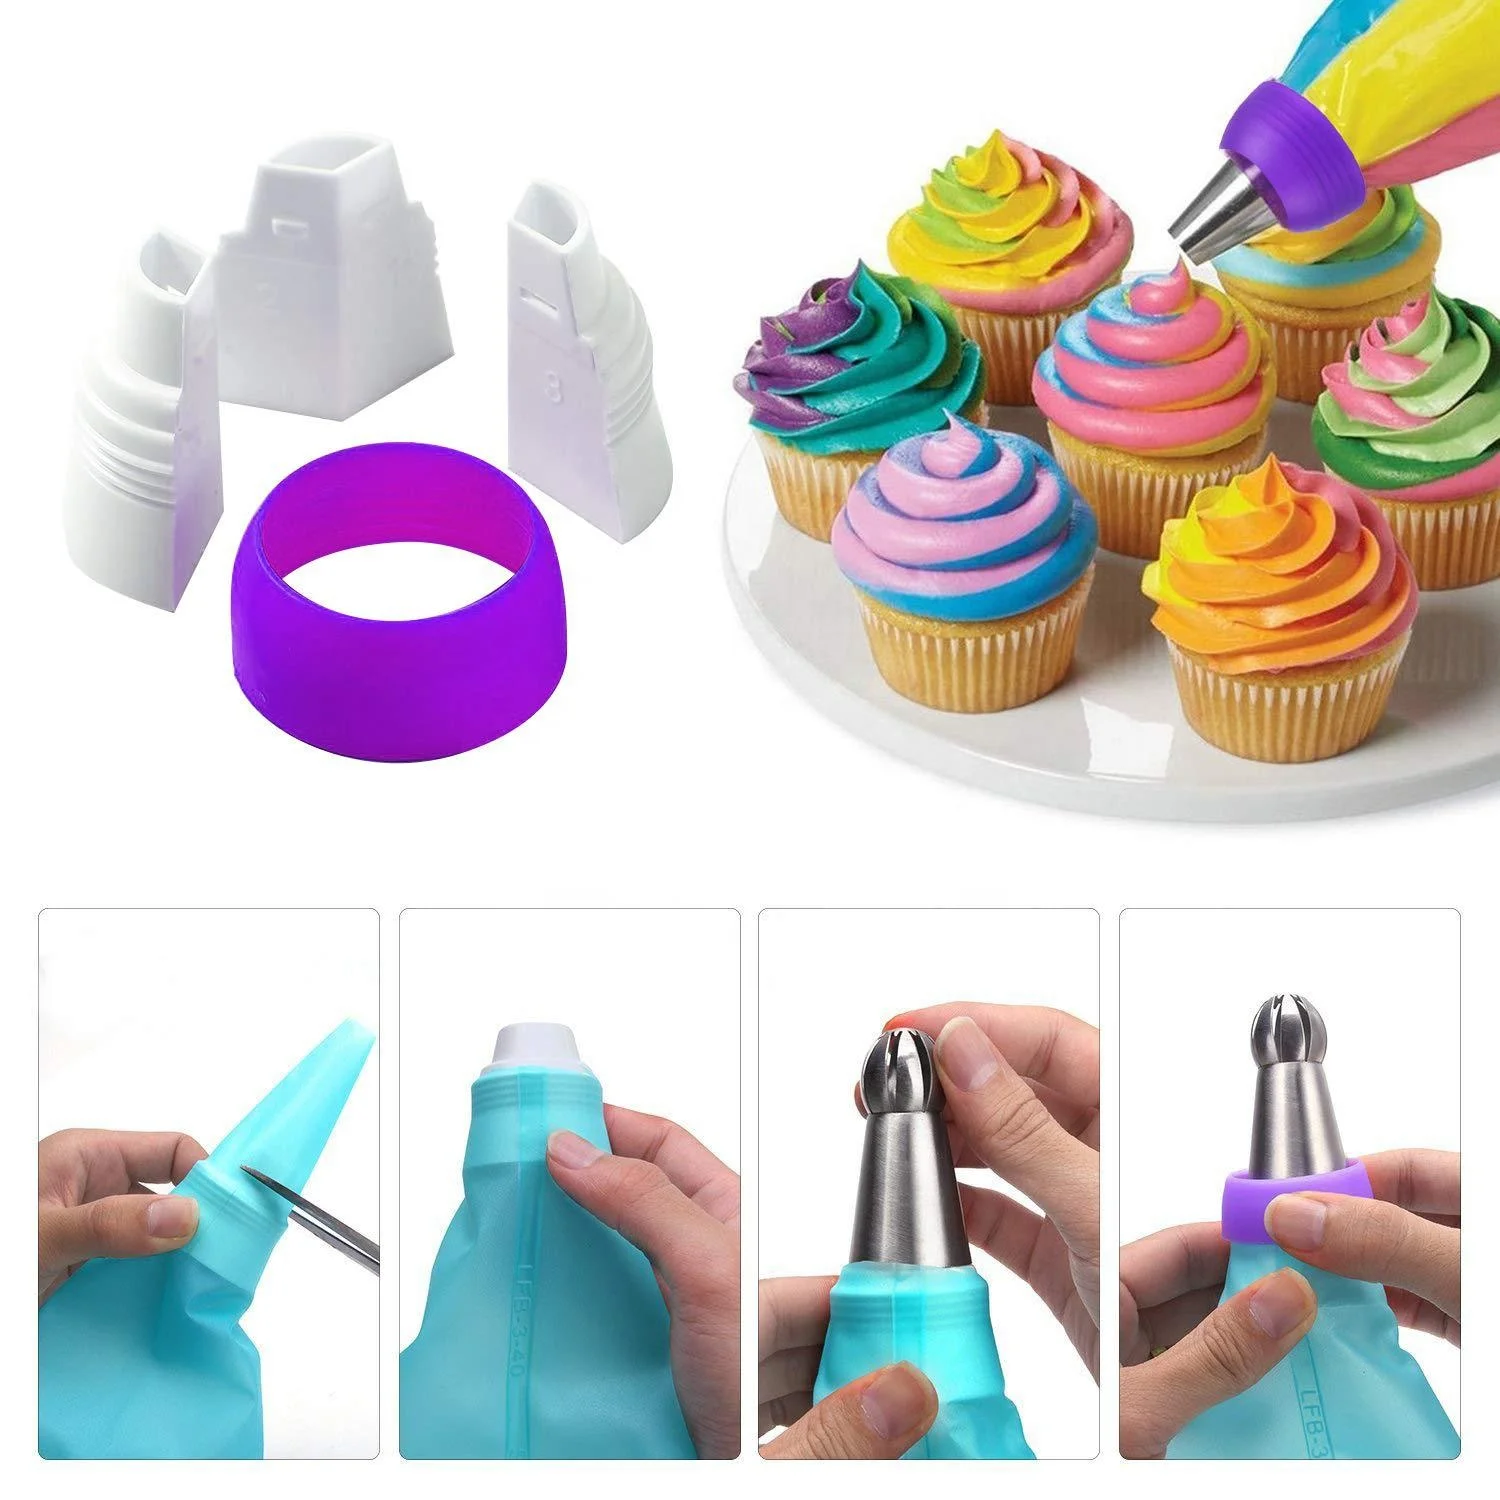 20 PCS Silicone Cake Accessories Nozzles Tips Cake Decoration Tools Bakes Flower Nozzles Large Cupcake Decorating Kit